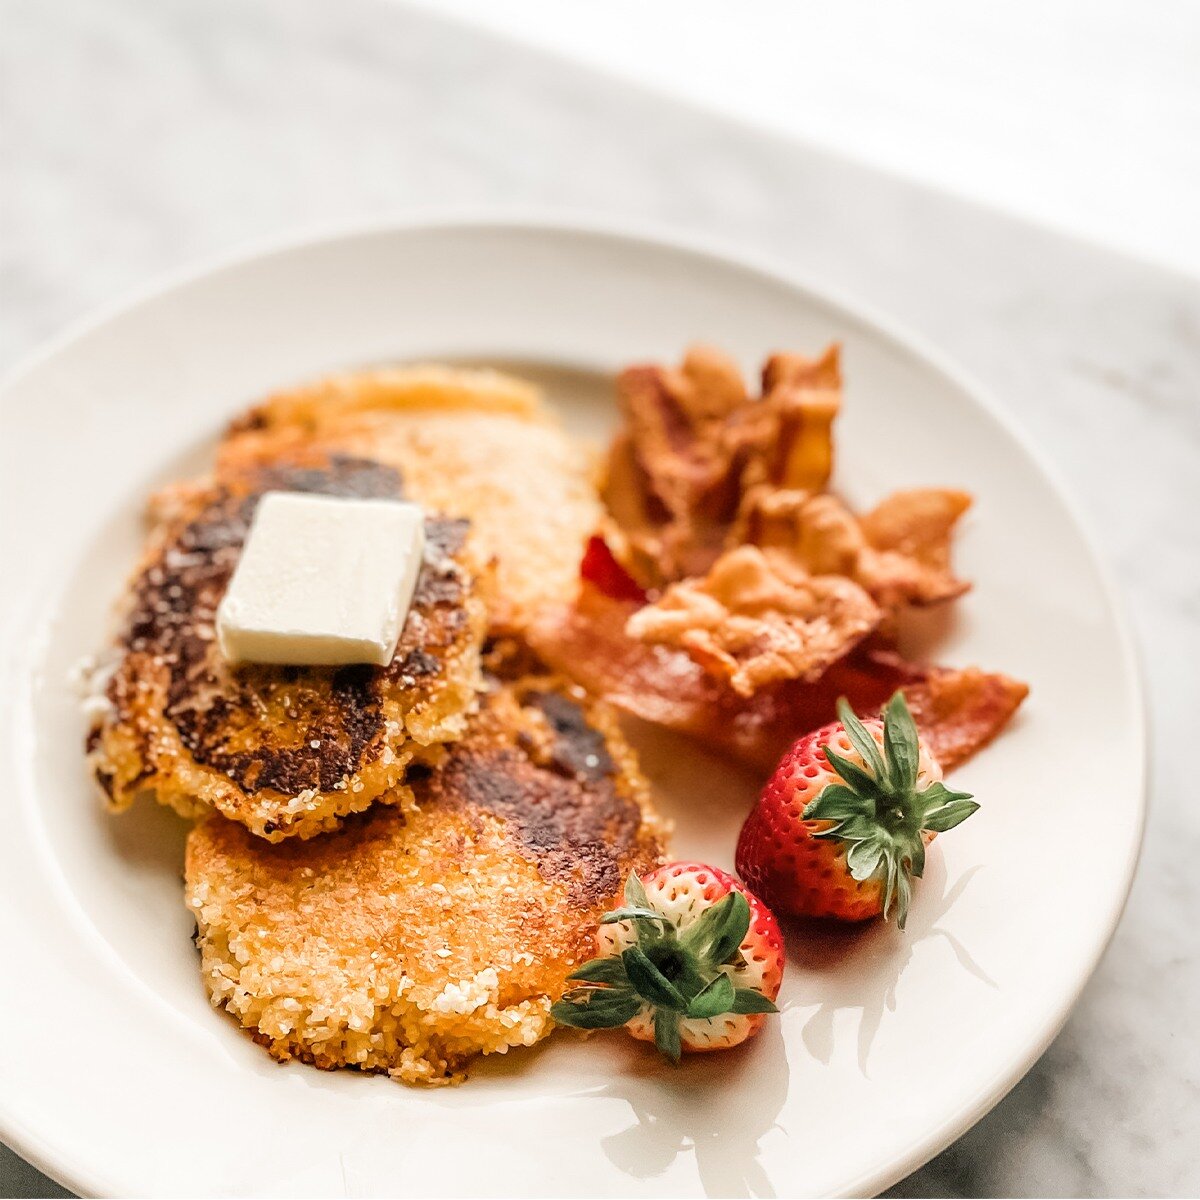 We learned about &quot;Hoecakes&quot; and had to give 'em a try &ndash; they taste as good as they look(especially swimming in butter and honey)! They also come with a heaping side of history. Get the full story and the recipe to make 'em over at You